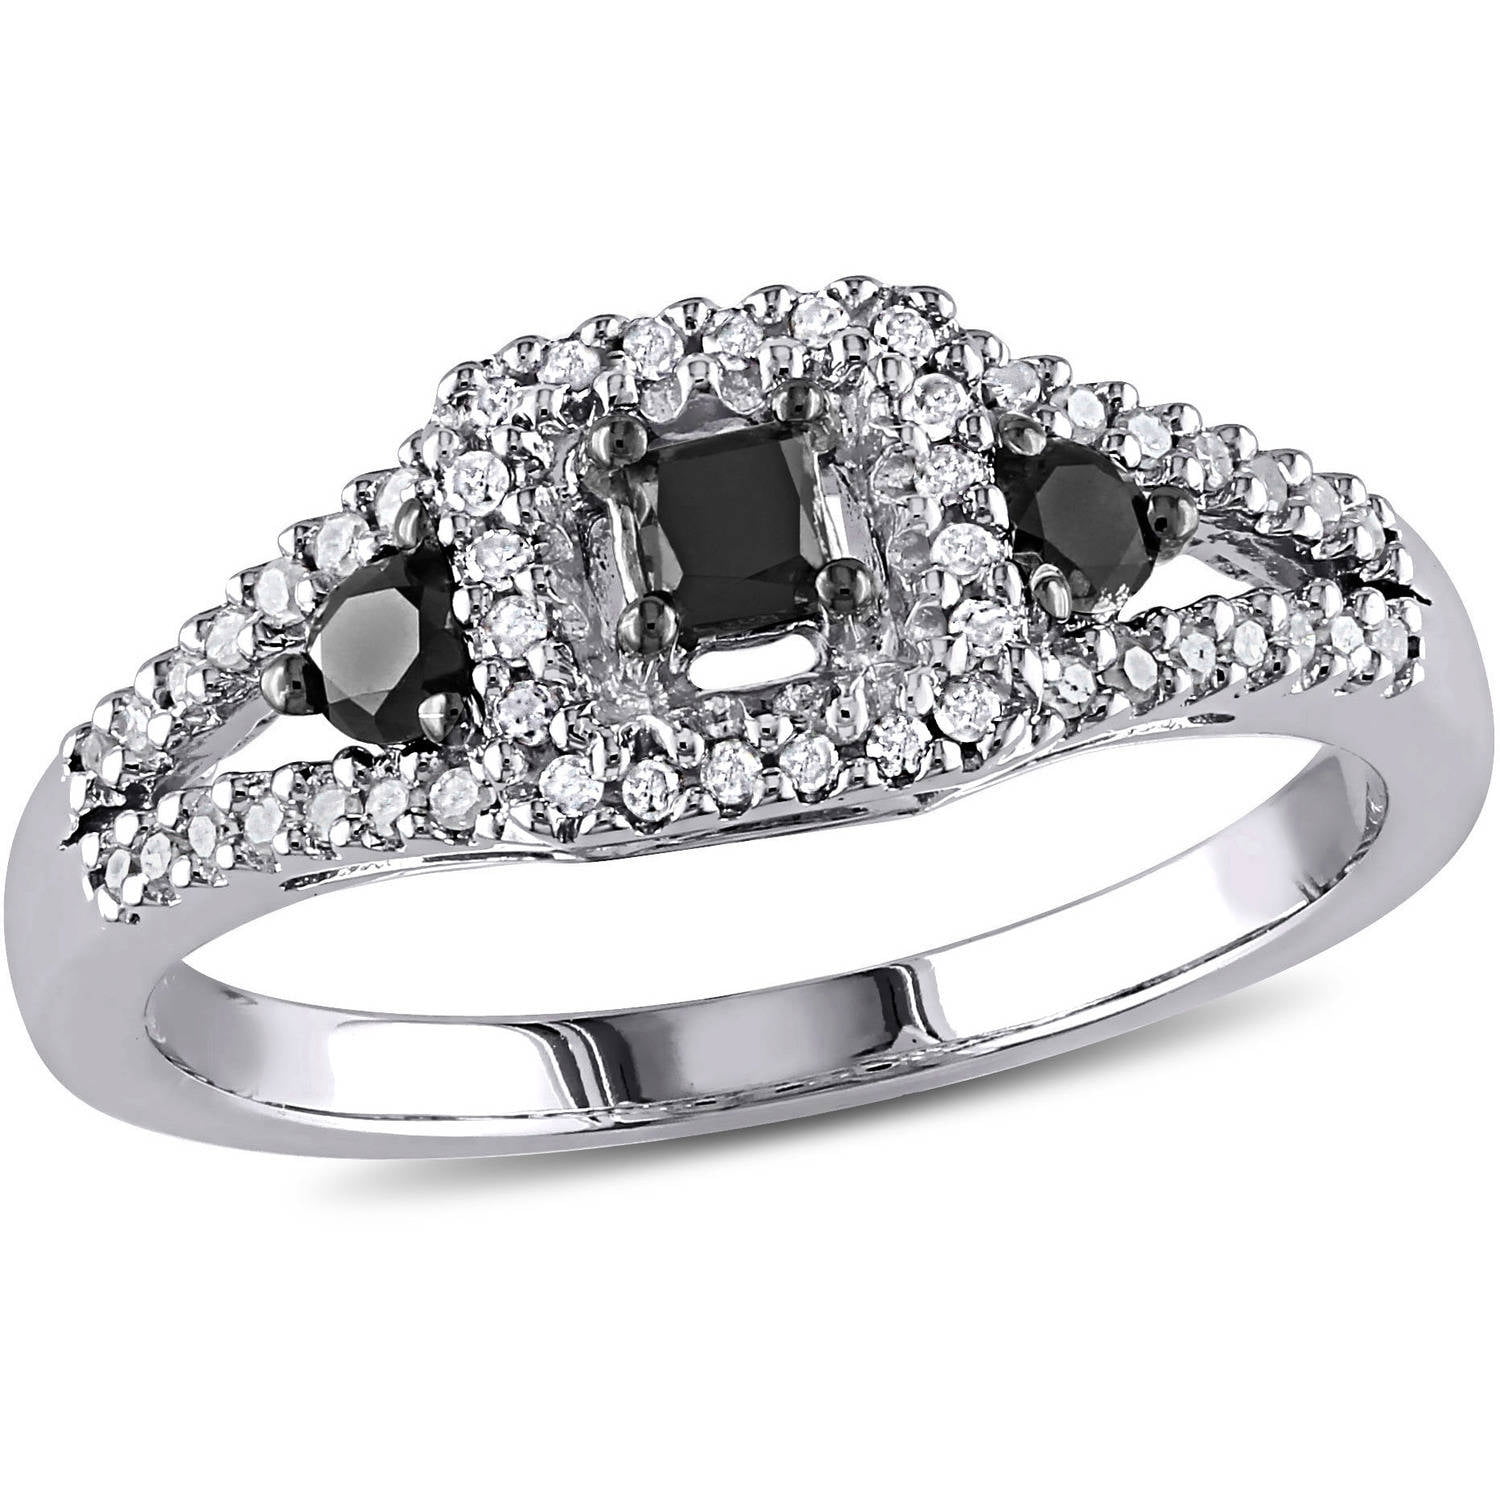 Ring in .925 Sterling Silver Oxidized with Rosecut & Pave Diamonds with Diamond shank Size 7.5 Rosecut Diamond Ring